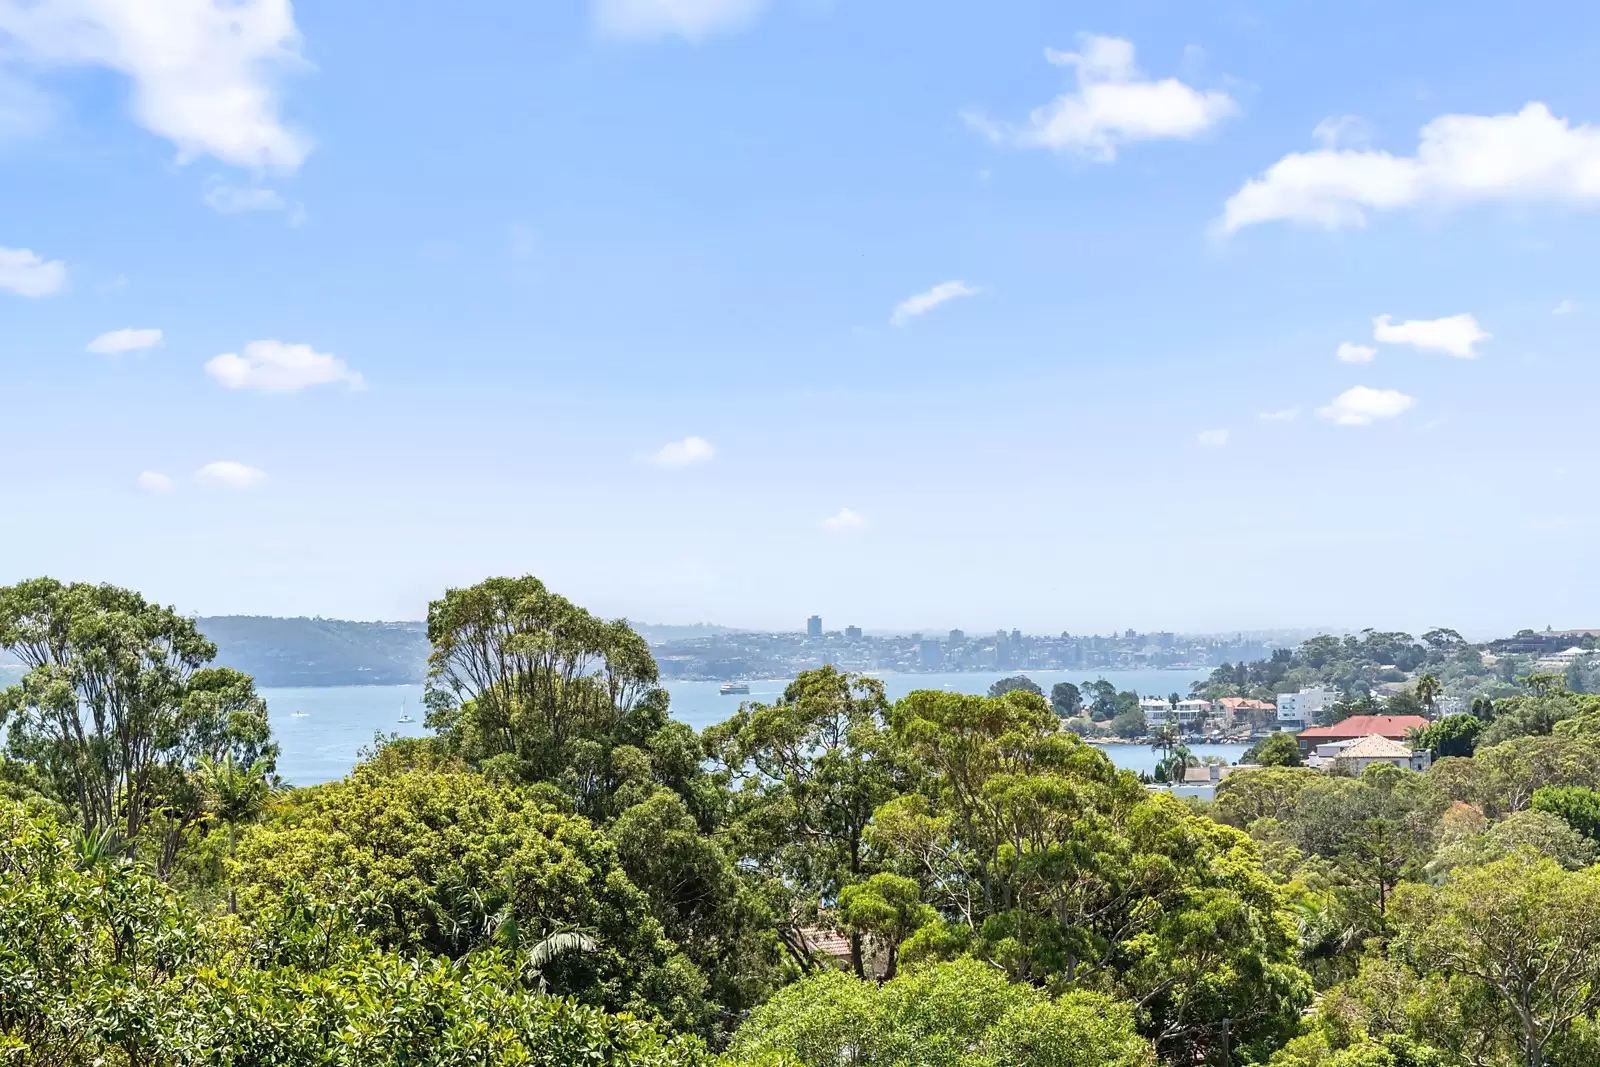 Photo #11: 19 Fitzwilliam Road, Vaucluse - Sold by Sydney Sotheby's International Realty